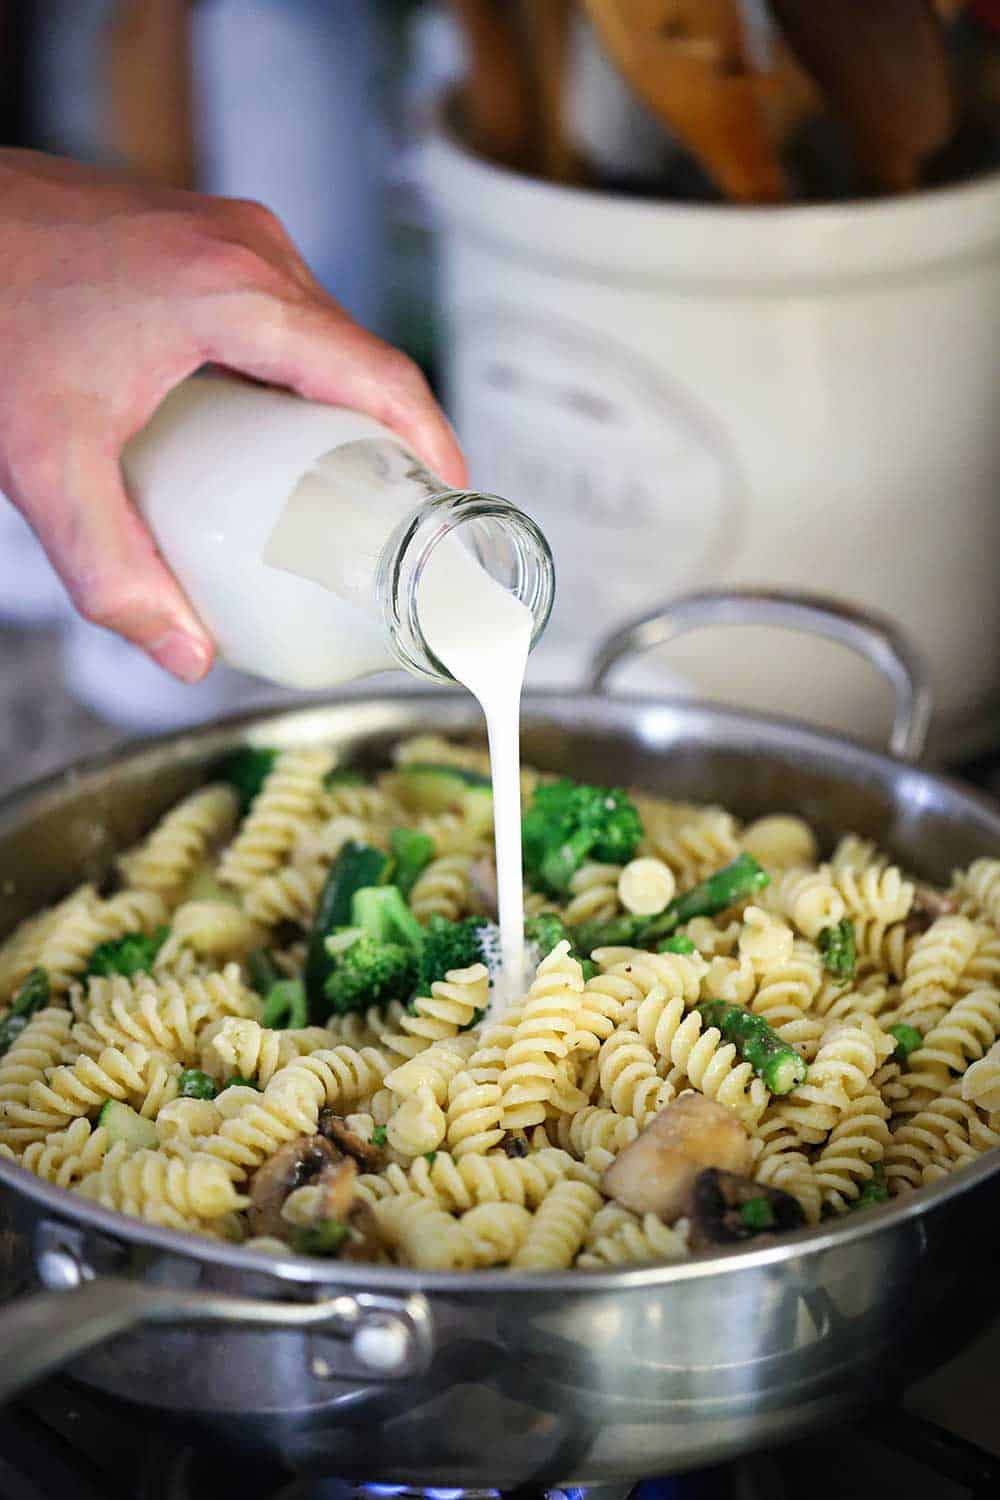 A hand pouring cream from a milk jar into a skillet filled cooked pasta and broccoli.